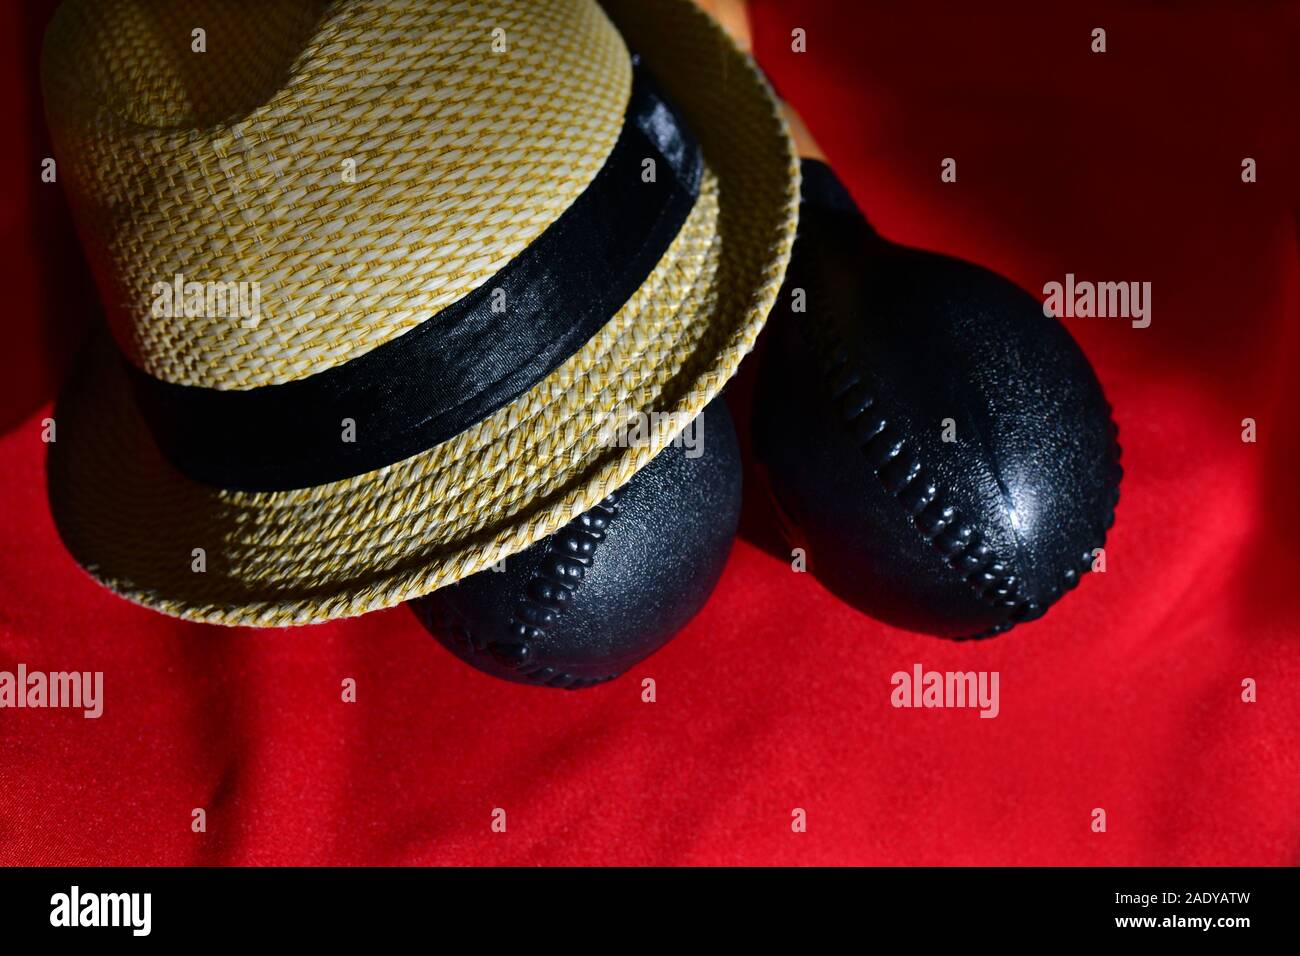 Typical cuban hat with black band besides maracas over a red background. Stock Photo